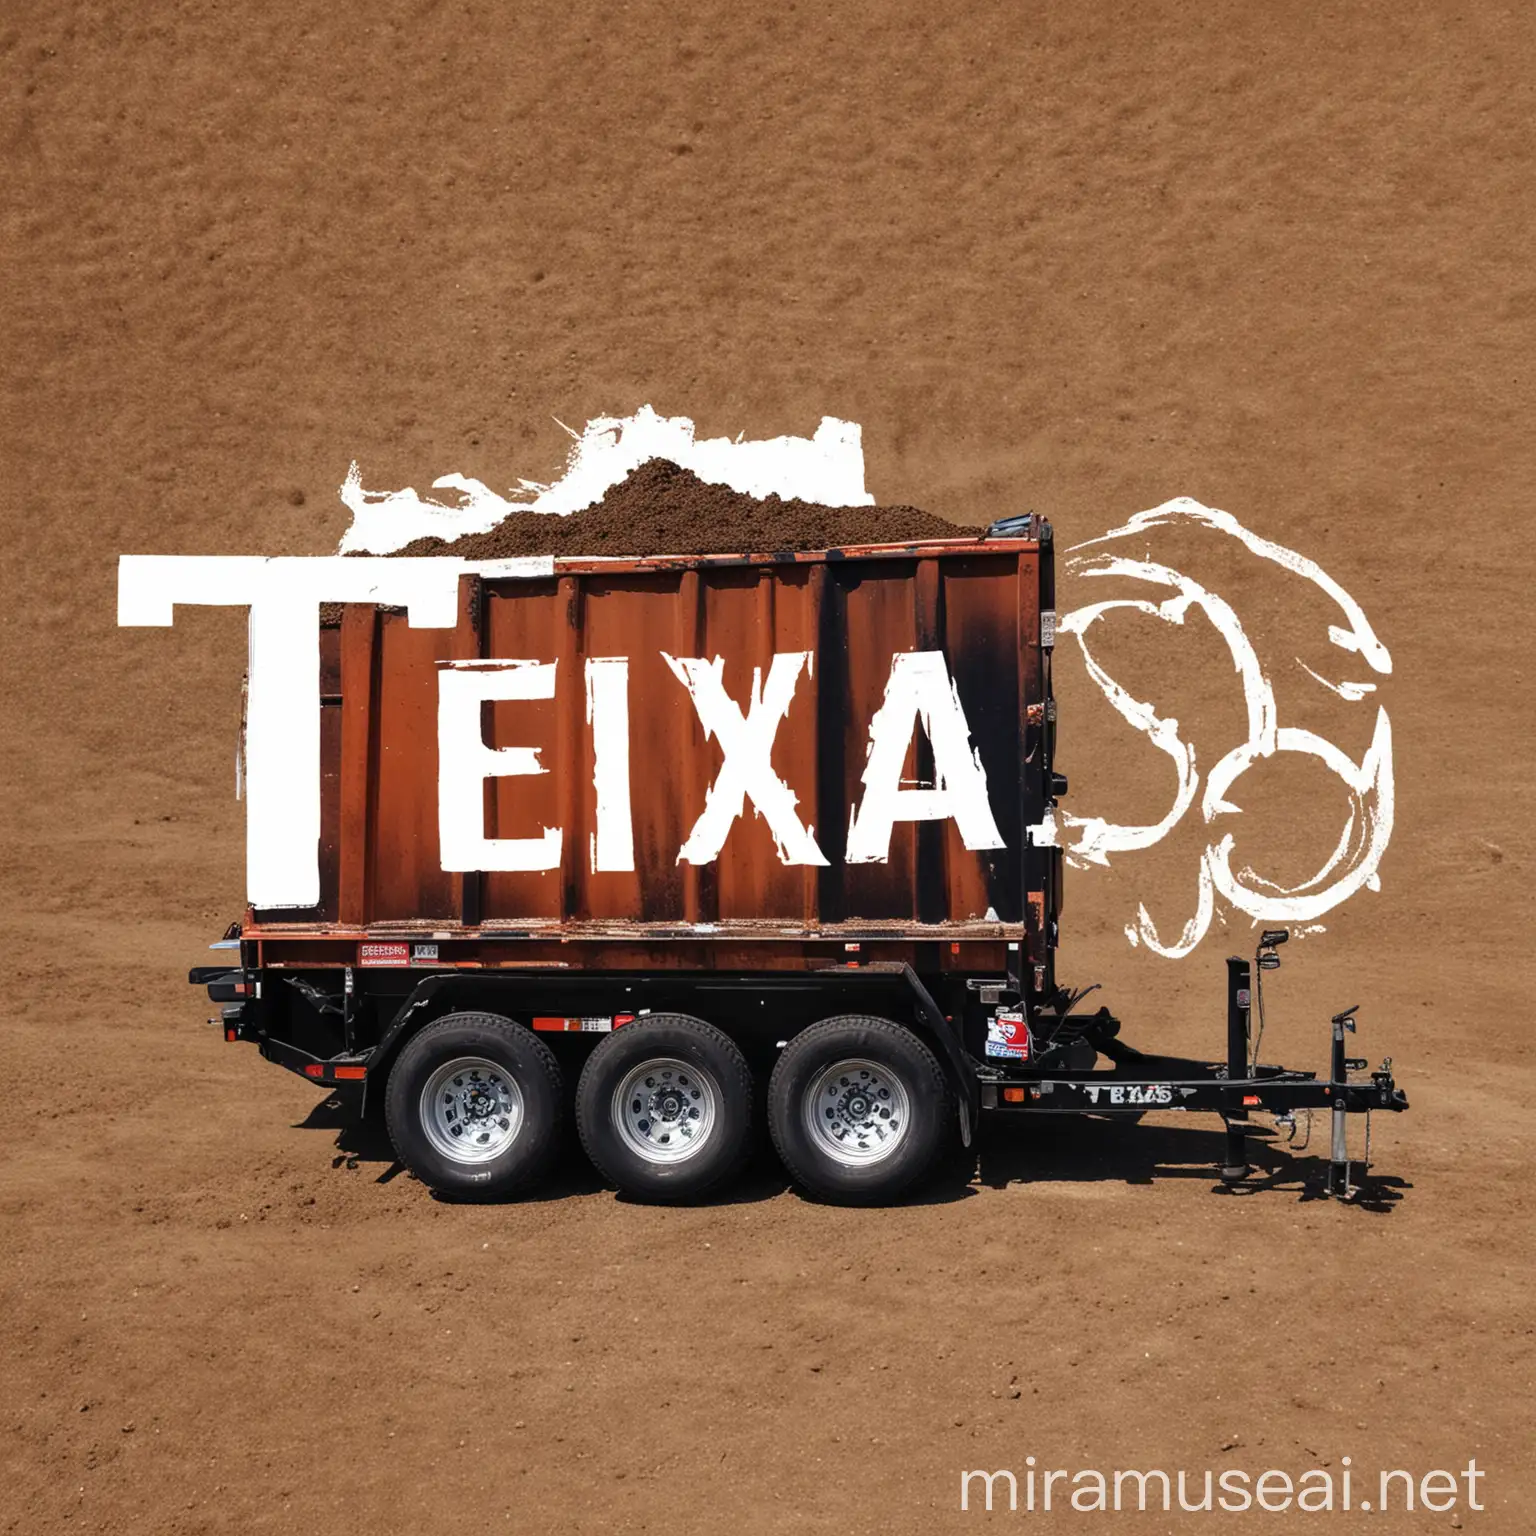 Texas Logo with Central Dump Trailer Iconic Lone Star State Symbol with Central Industrial Element